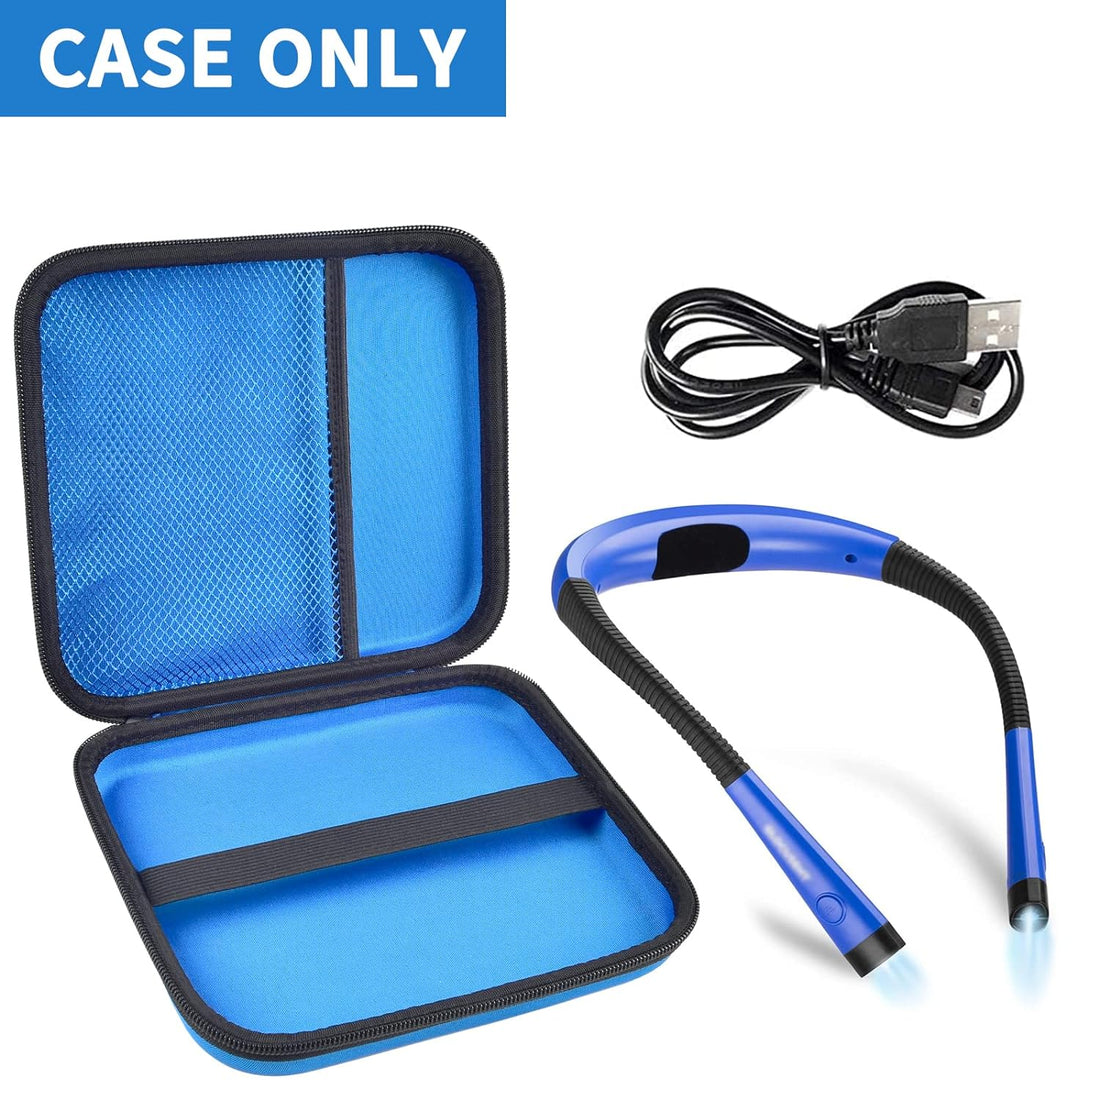 Case Compatible with Glocusent/ for Vekkia/ for LITOM/ for LEDGLE/ for TAKKUI/ for TSINGREE LED Neck Reading Light Book Light for Reading in Bed. Storage Carrying Holder for USB Cable (Box Only) -Blue